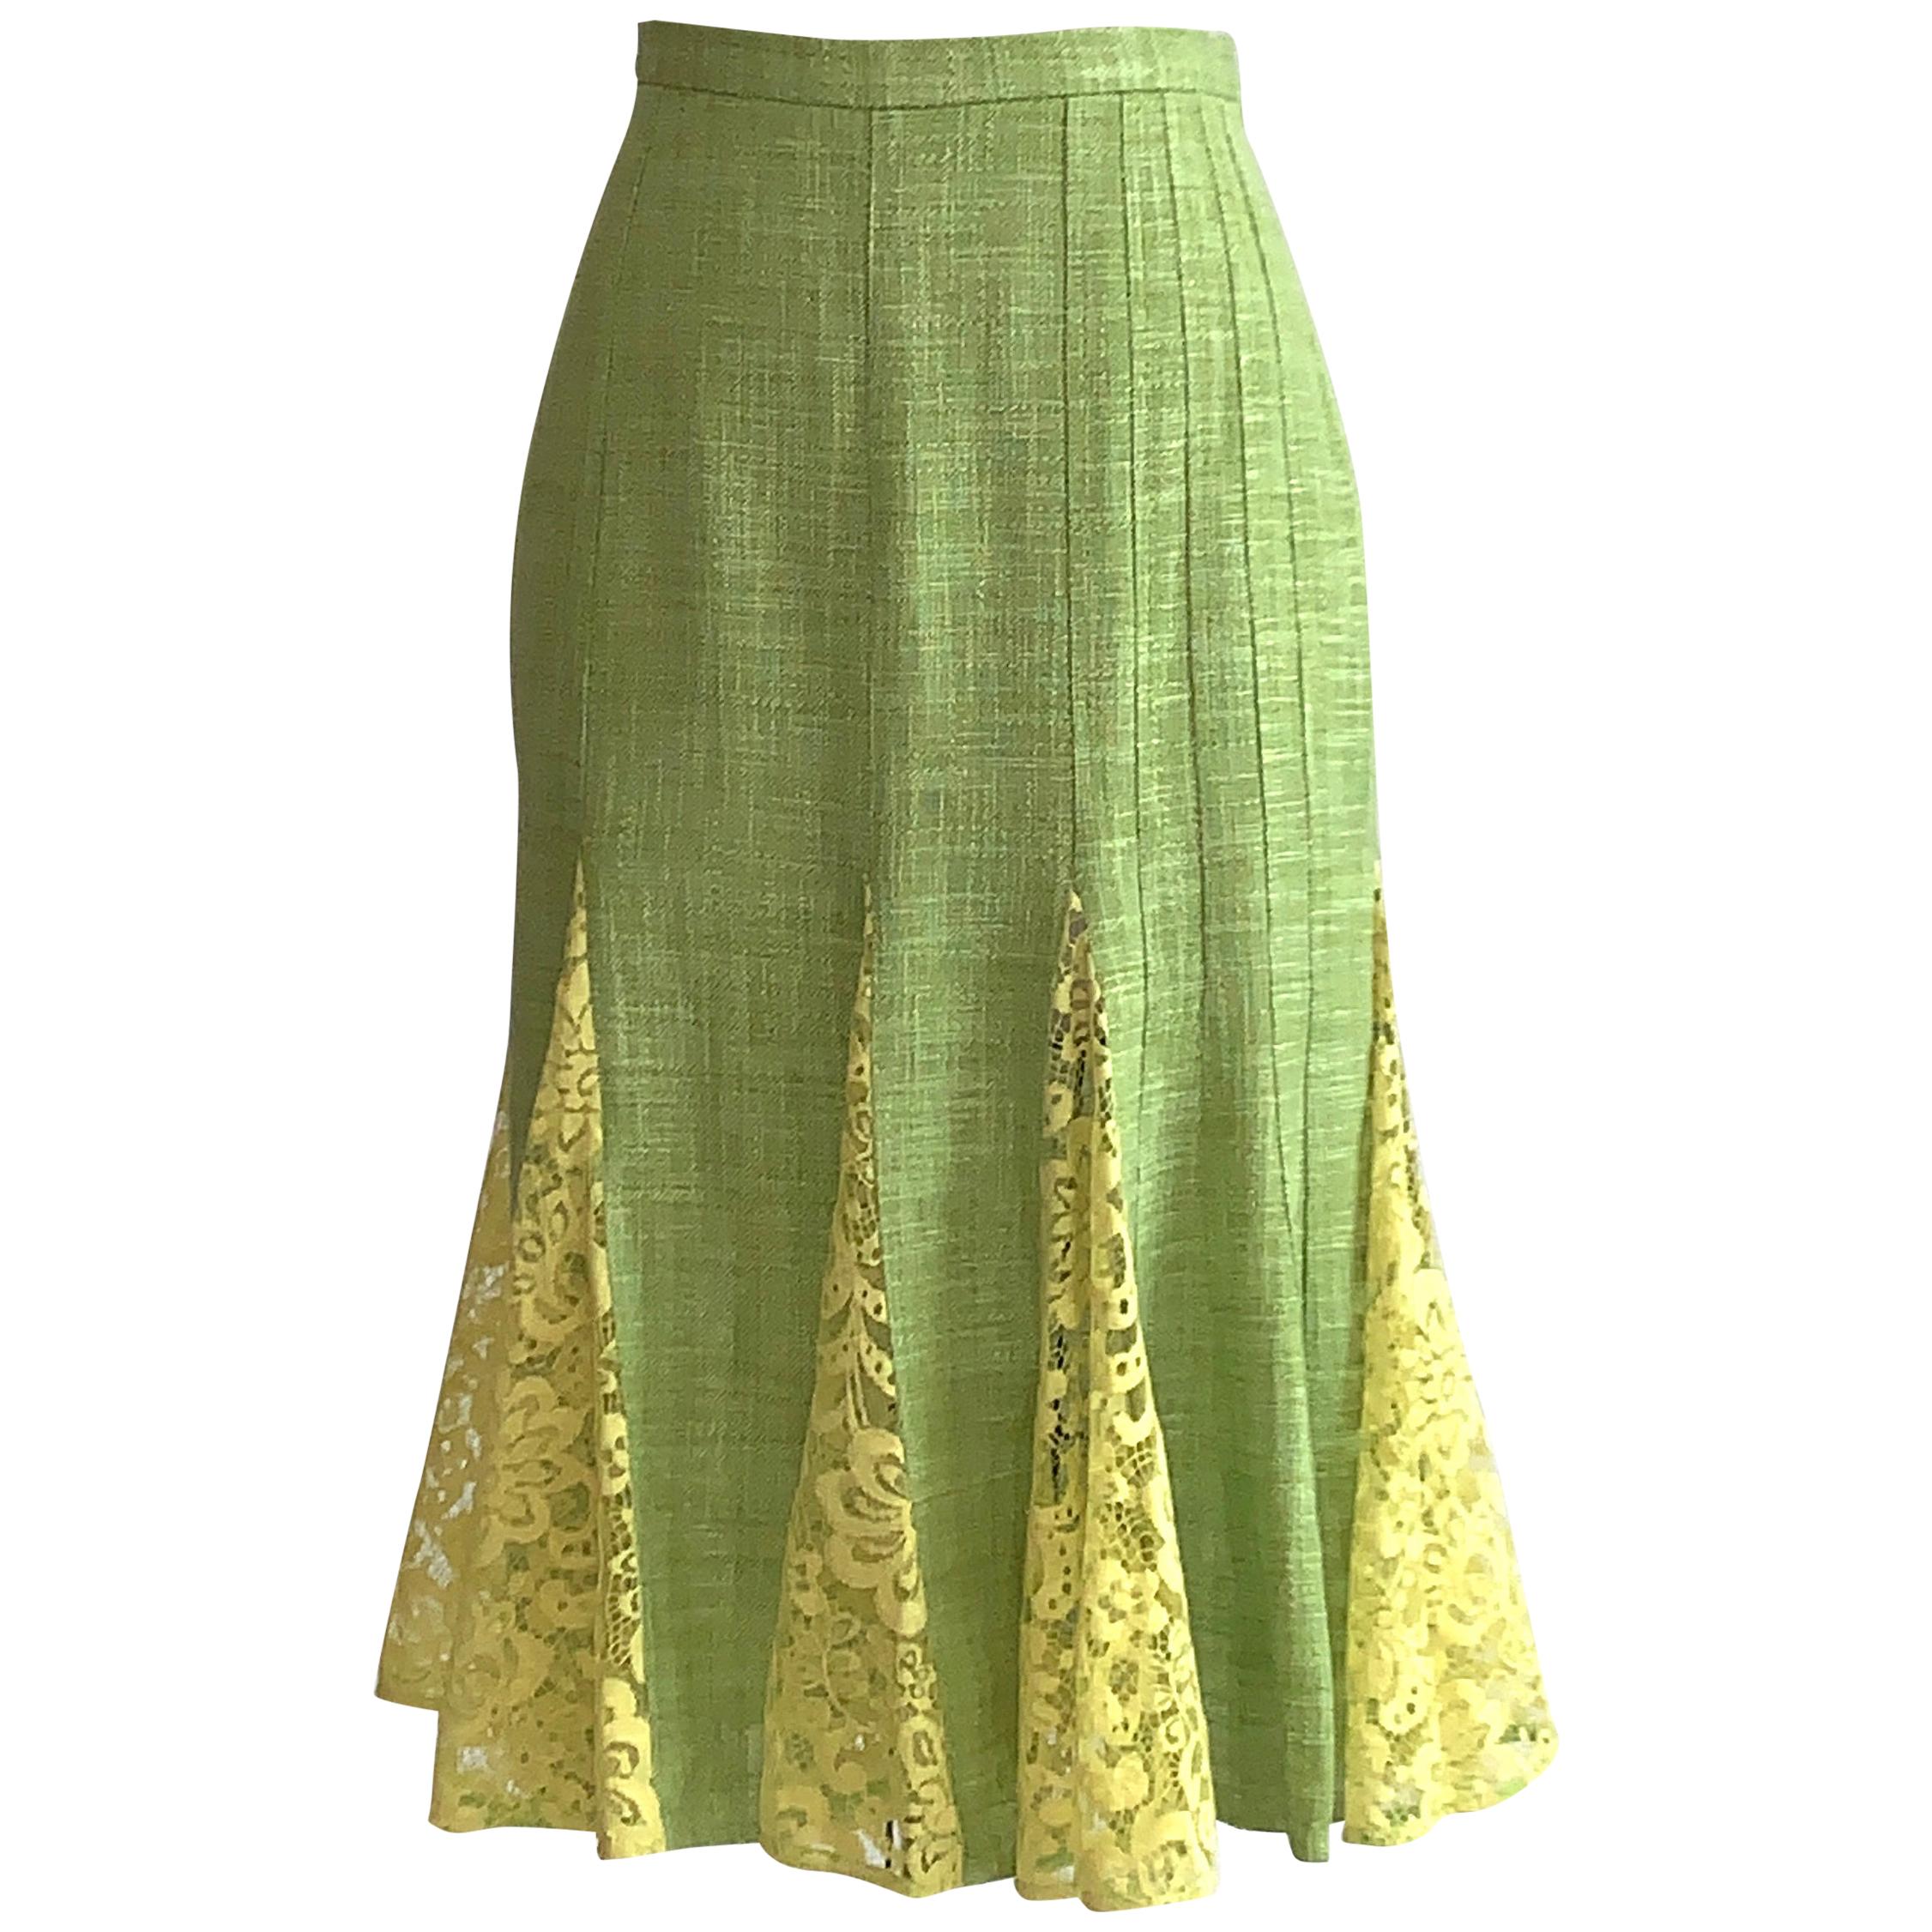 Dolce & Gabbana Lime Green Flared Pencil Skirt with Yellow Lace Accents